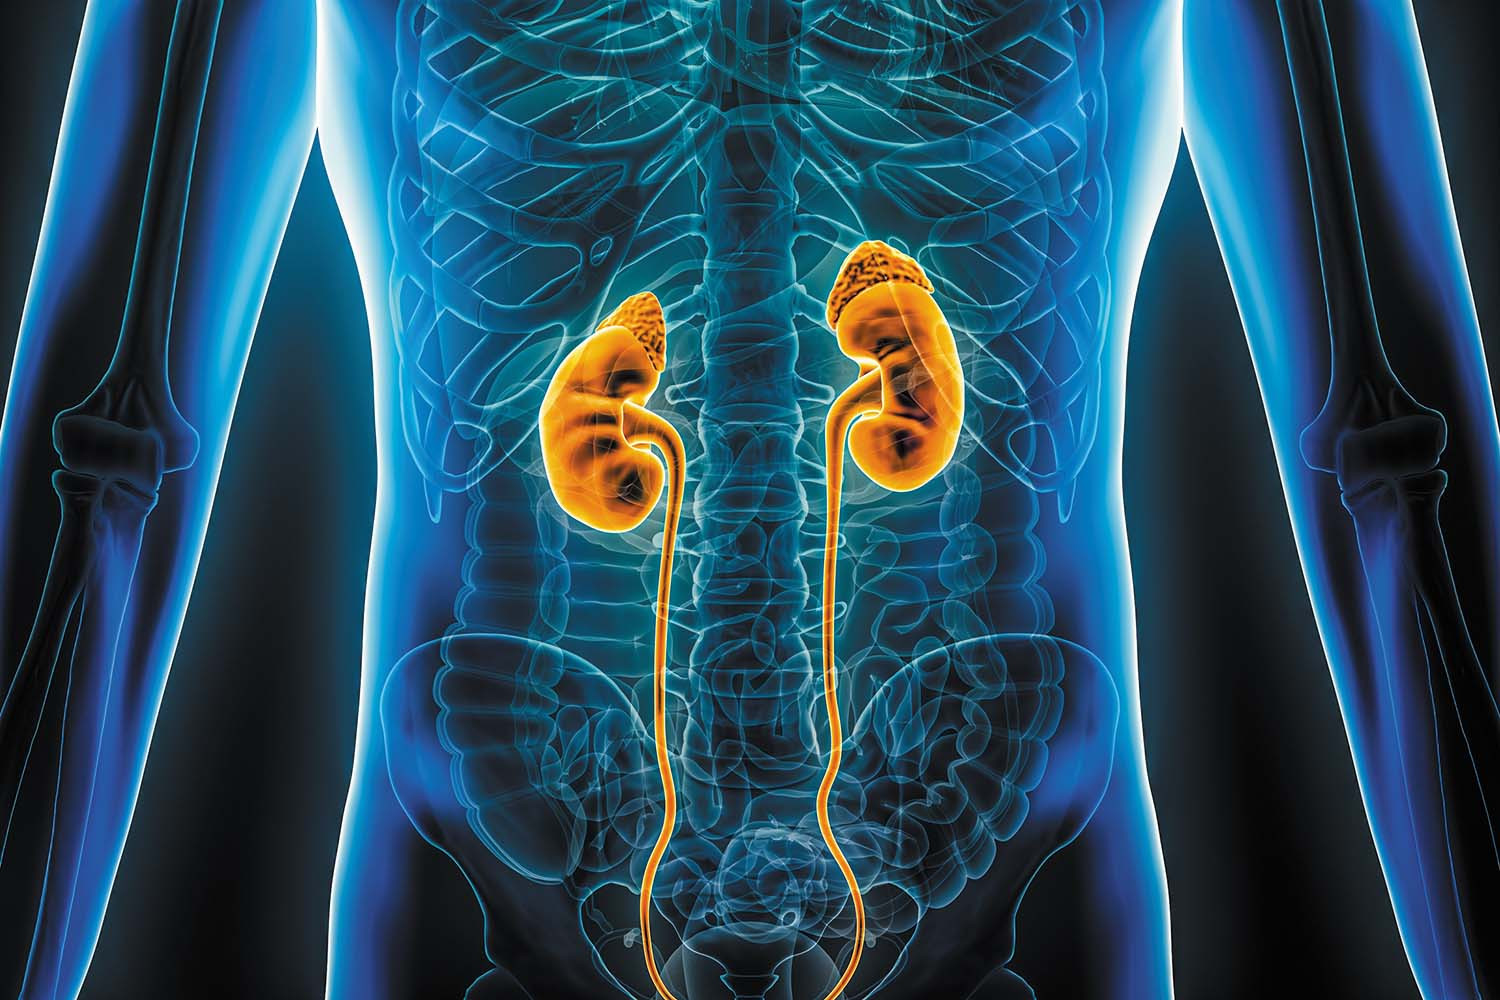 x-ray based illustration showing a translucent body in blue against a black background with the kidneys highlighted in orange